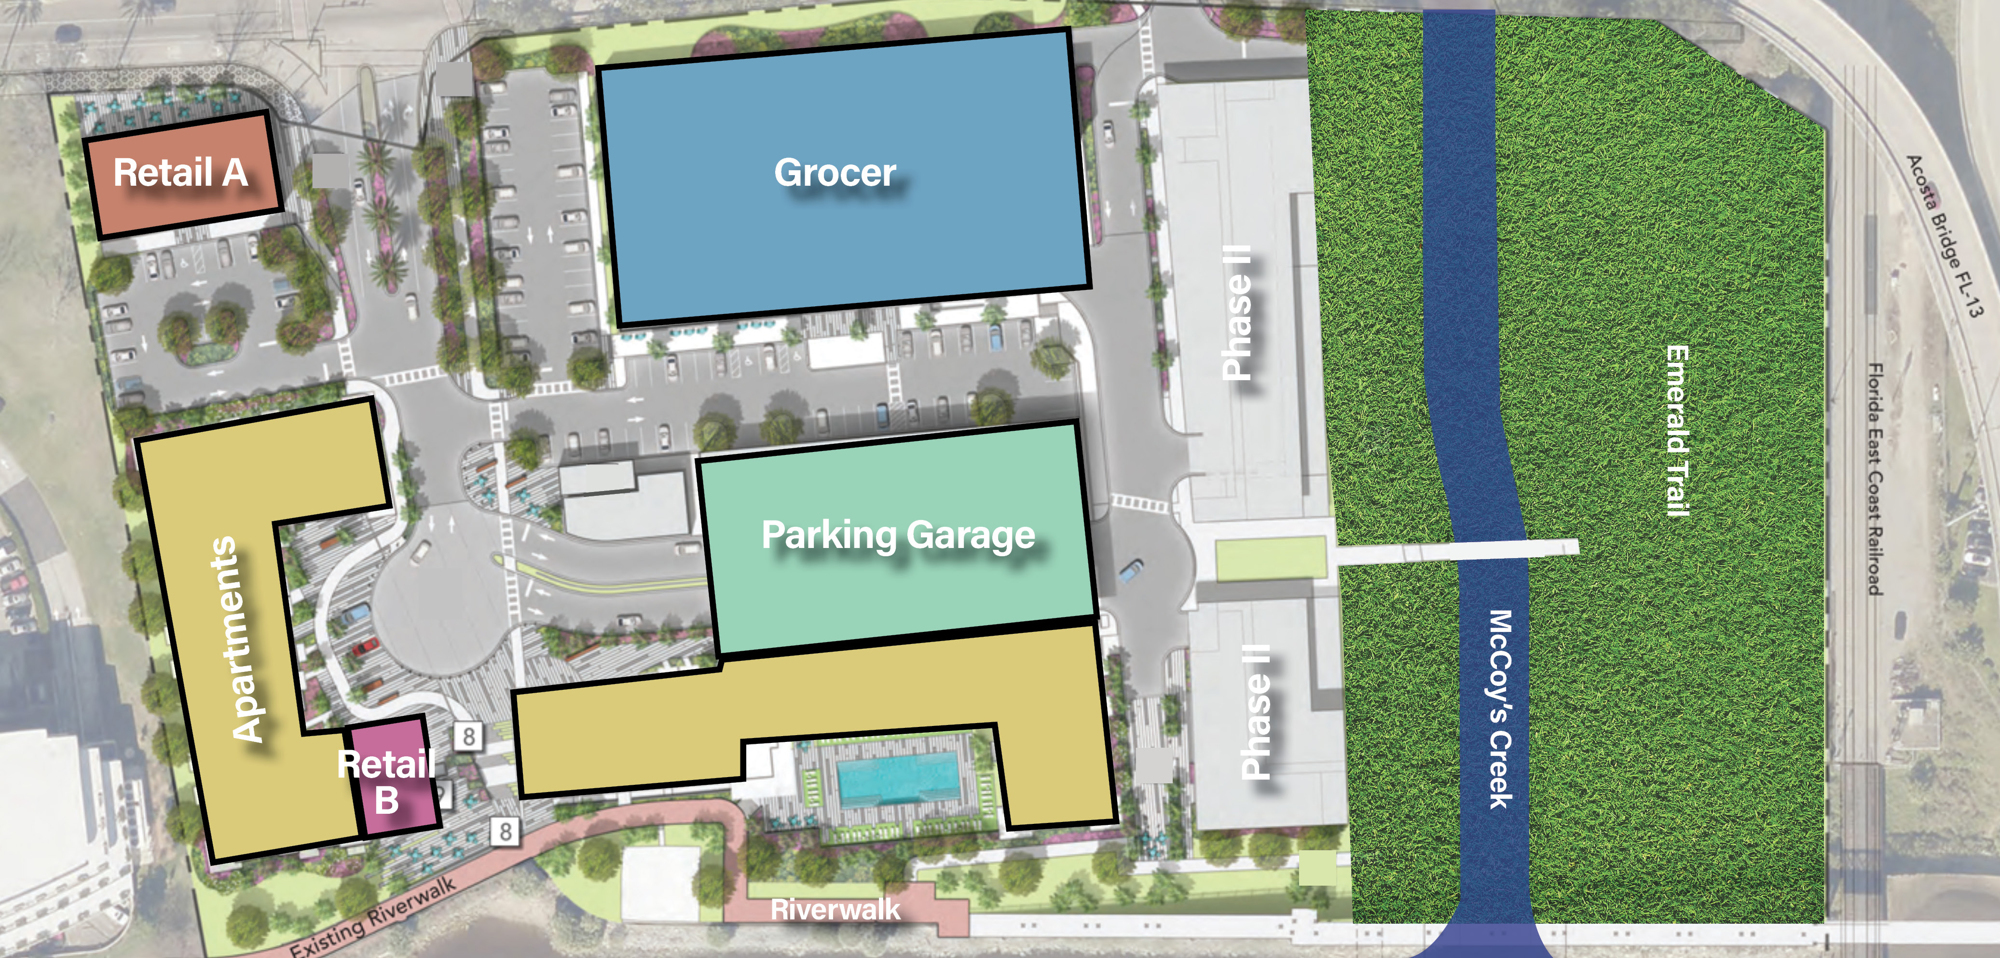 The site plan for One Riverside includes Whole Foods Market in the grocer spot, apartments, retail and a restuarant.